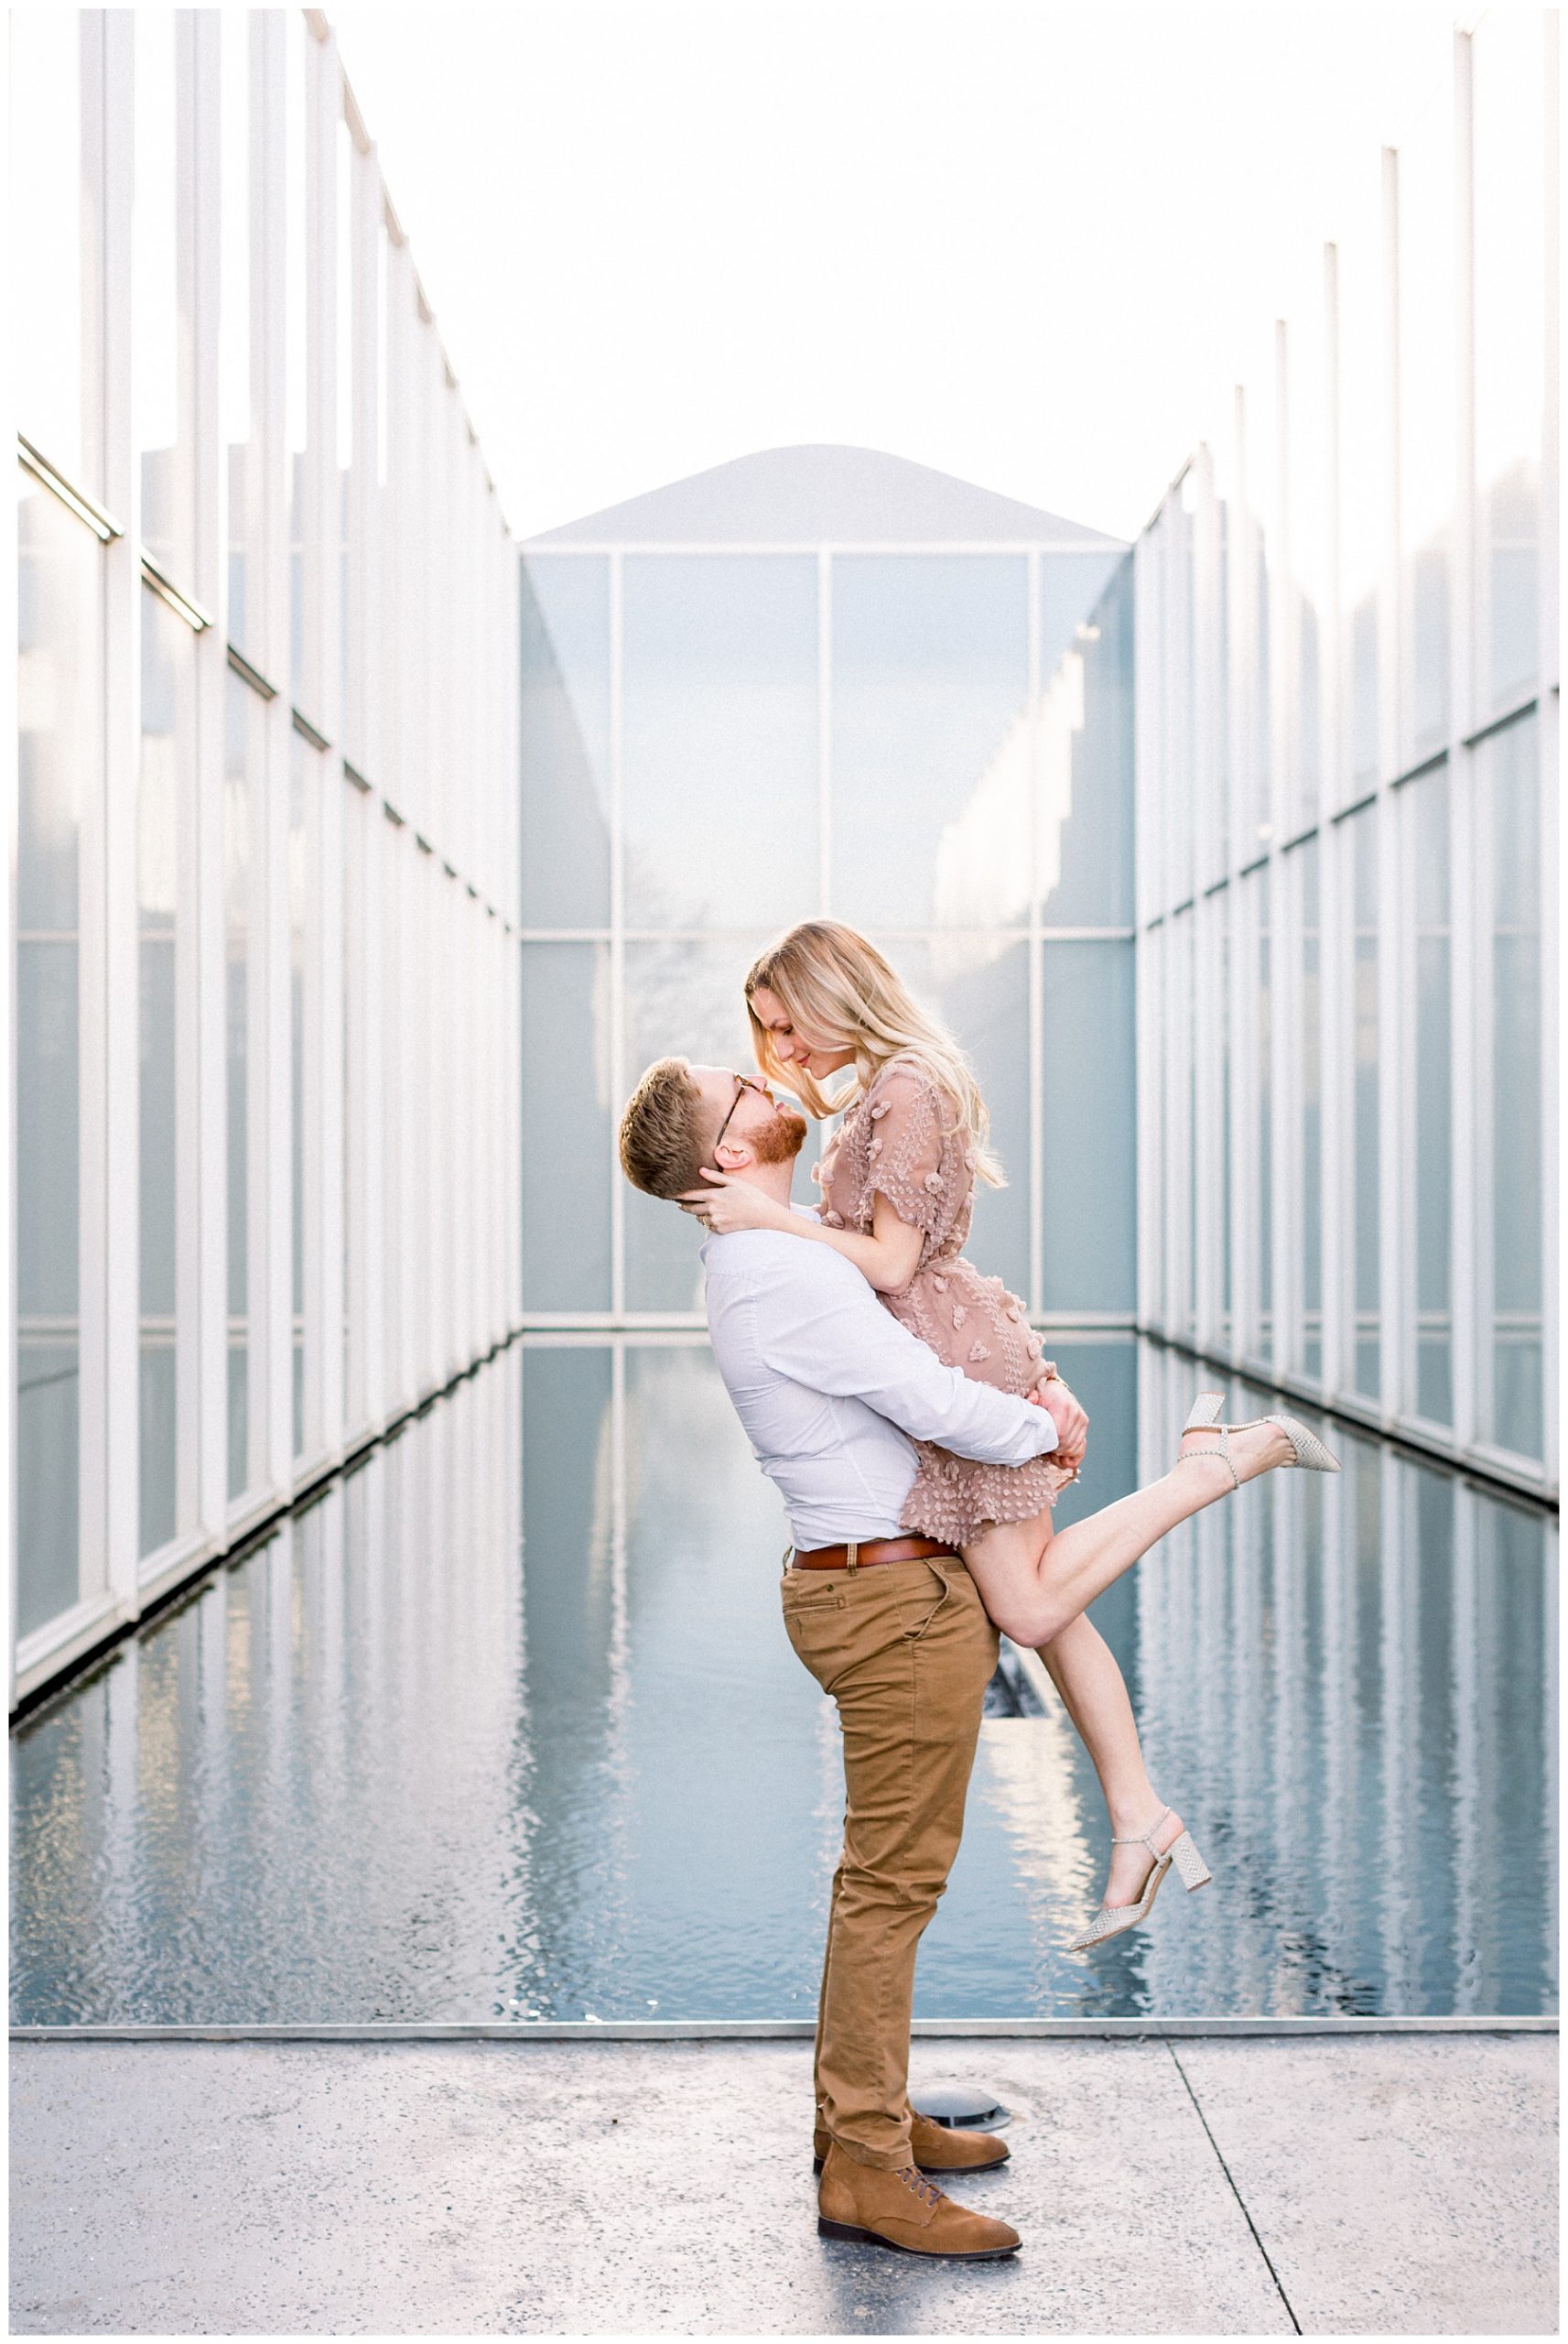 North Carolina Museum of Art Spring Engagement Session in Raleigh North Carolina at art exhibit